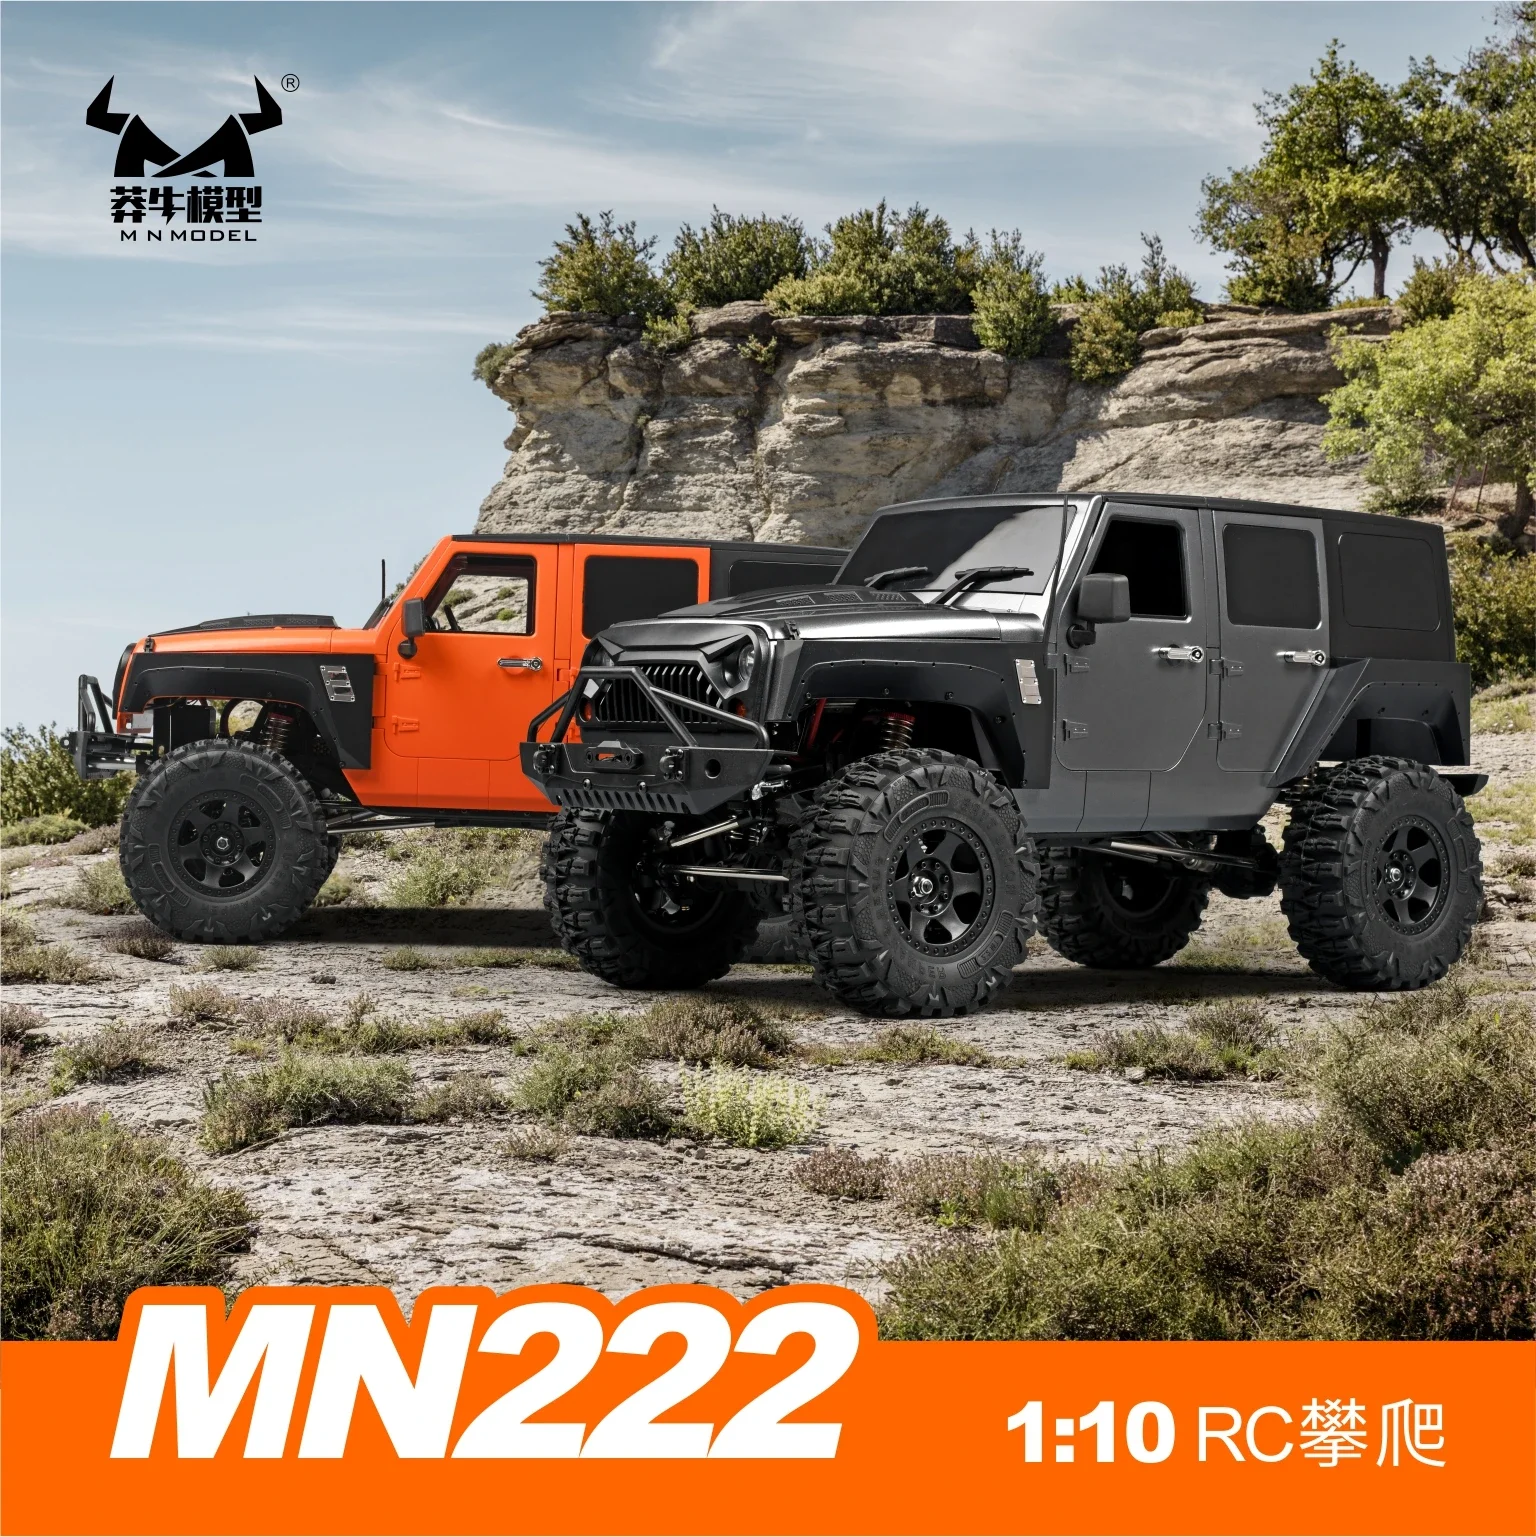 

2024 Remote-Controlled Car Mn-222 Full Proportion Rc Remote-Controlled Car 2.4g Four-Wheel Drive Climbing Car Model Ra Car Toy